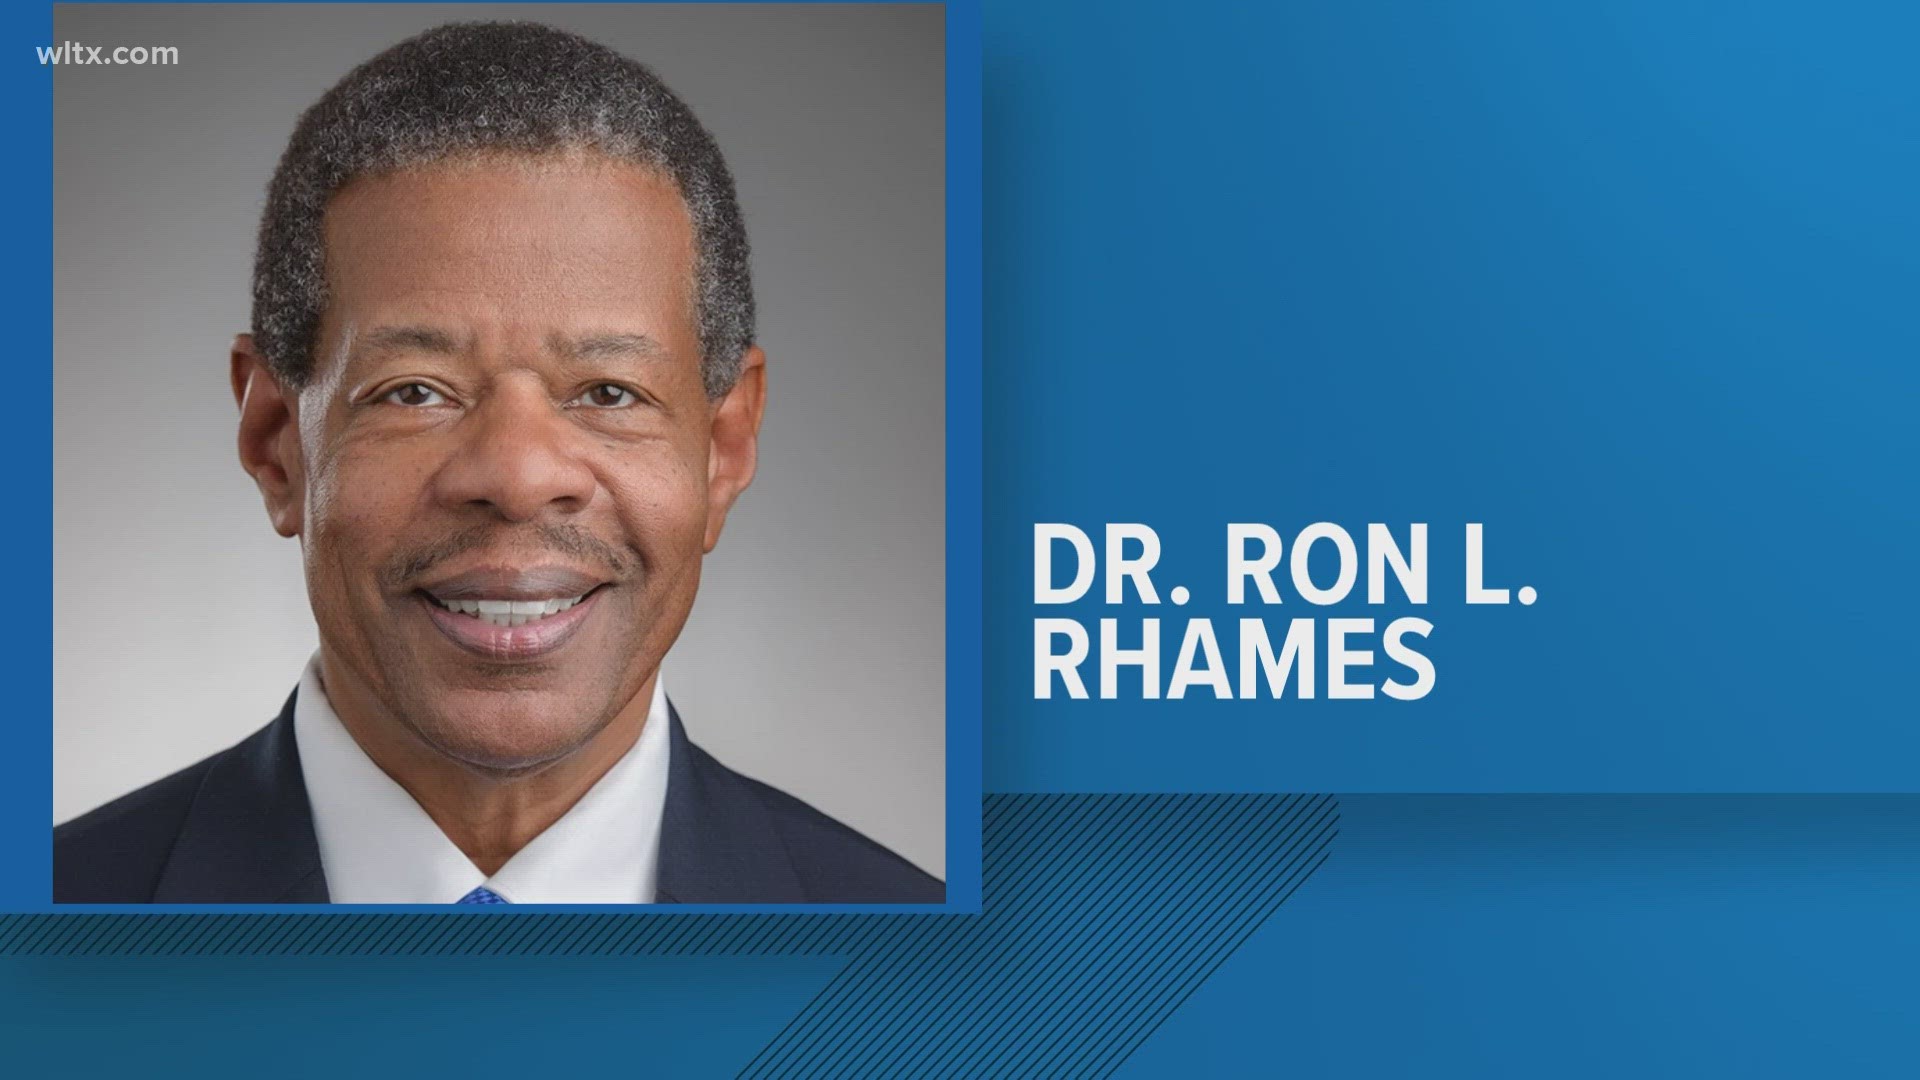 Dr. Ronald Rhames said he will retire by June 30, 2024